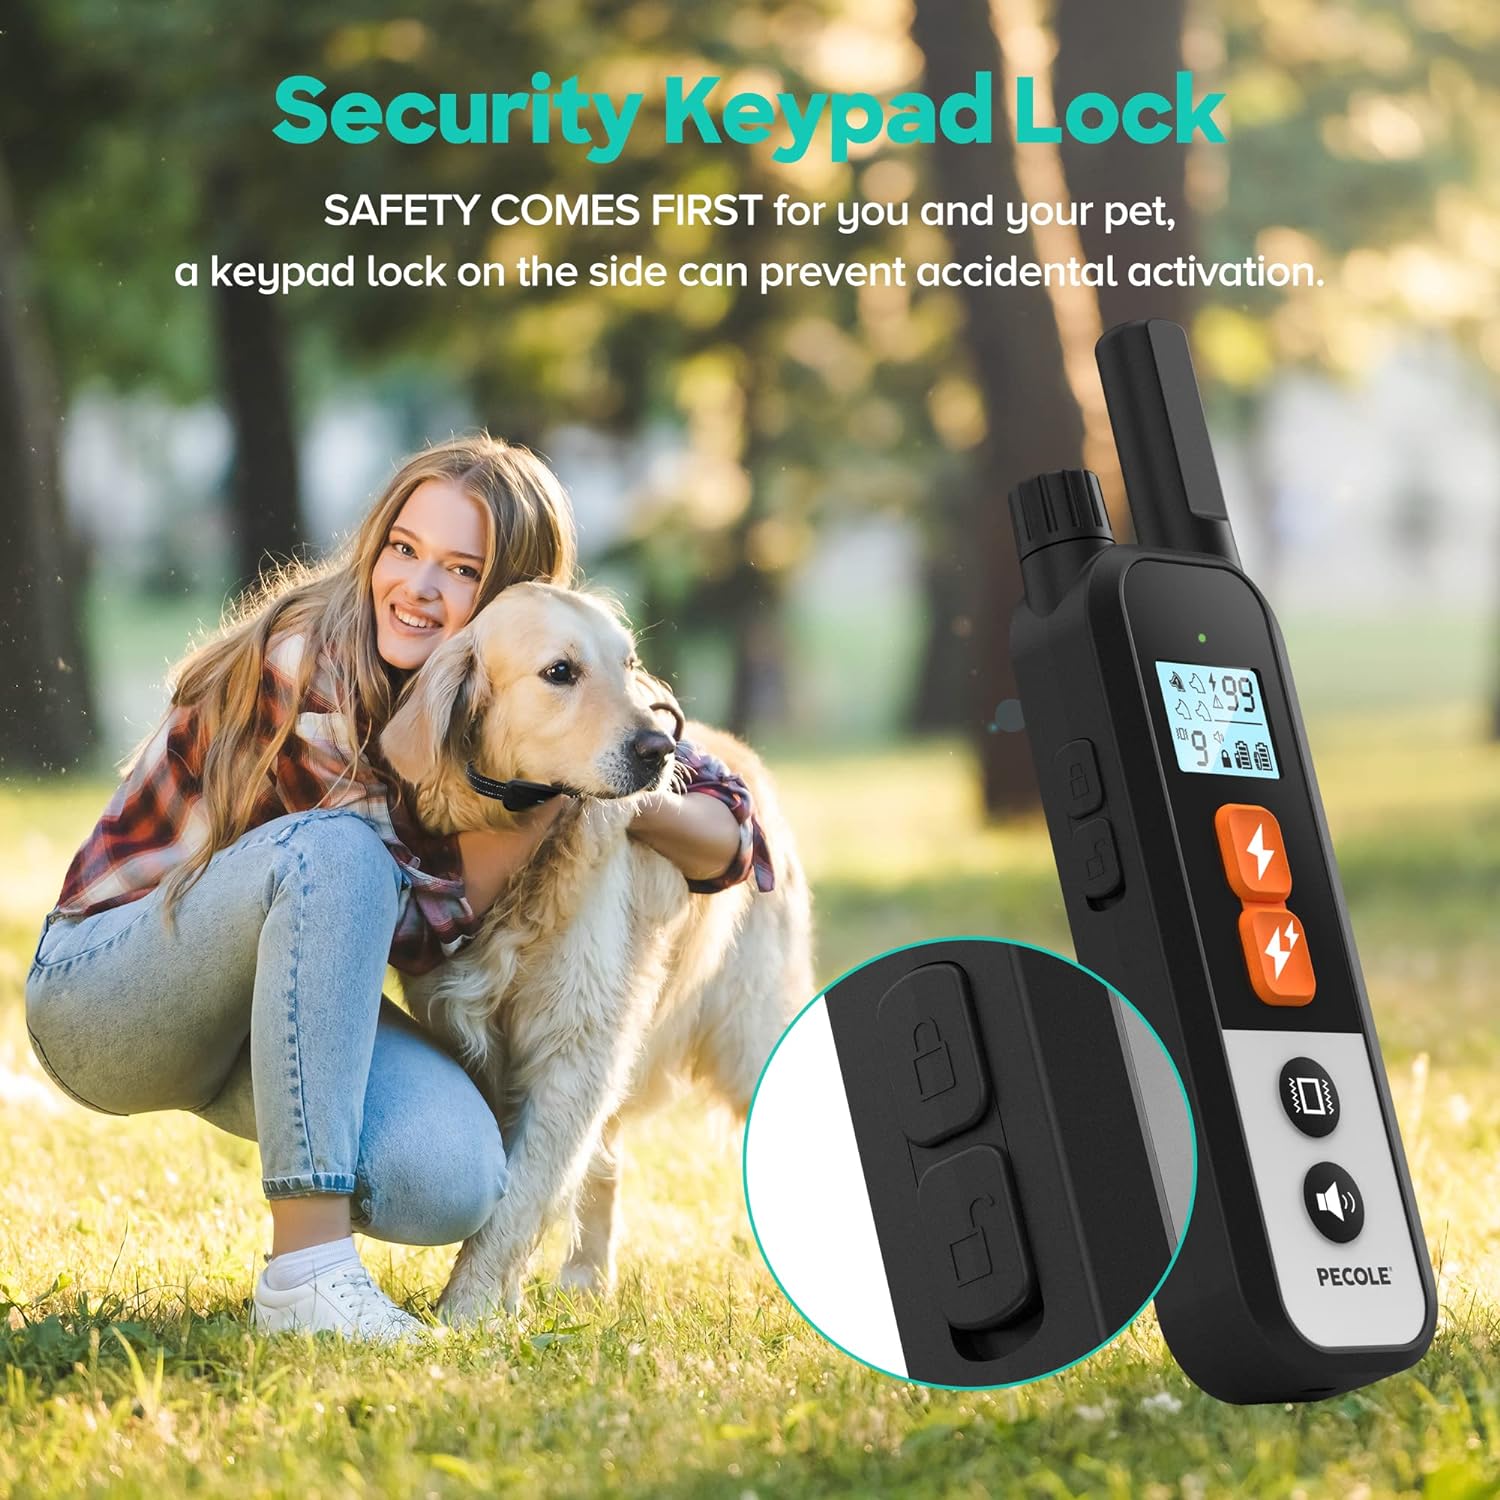 Dog Shock Collar - Dog Training Collar with Remote 1600FT, 3 Training Modes with 99 Adjustable Levels, Rechargeable Waterproof E-Collar with Security Lock for All Breeds and Sizes